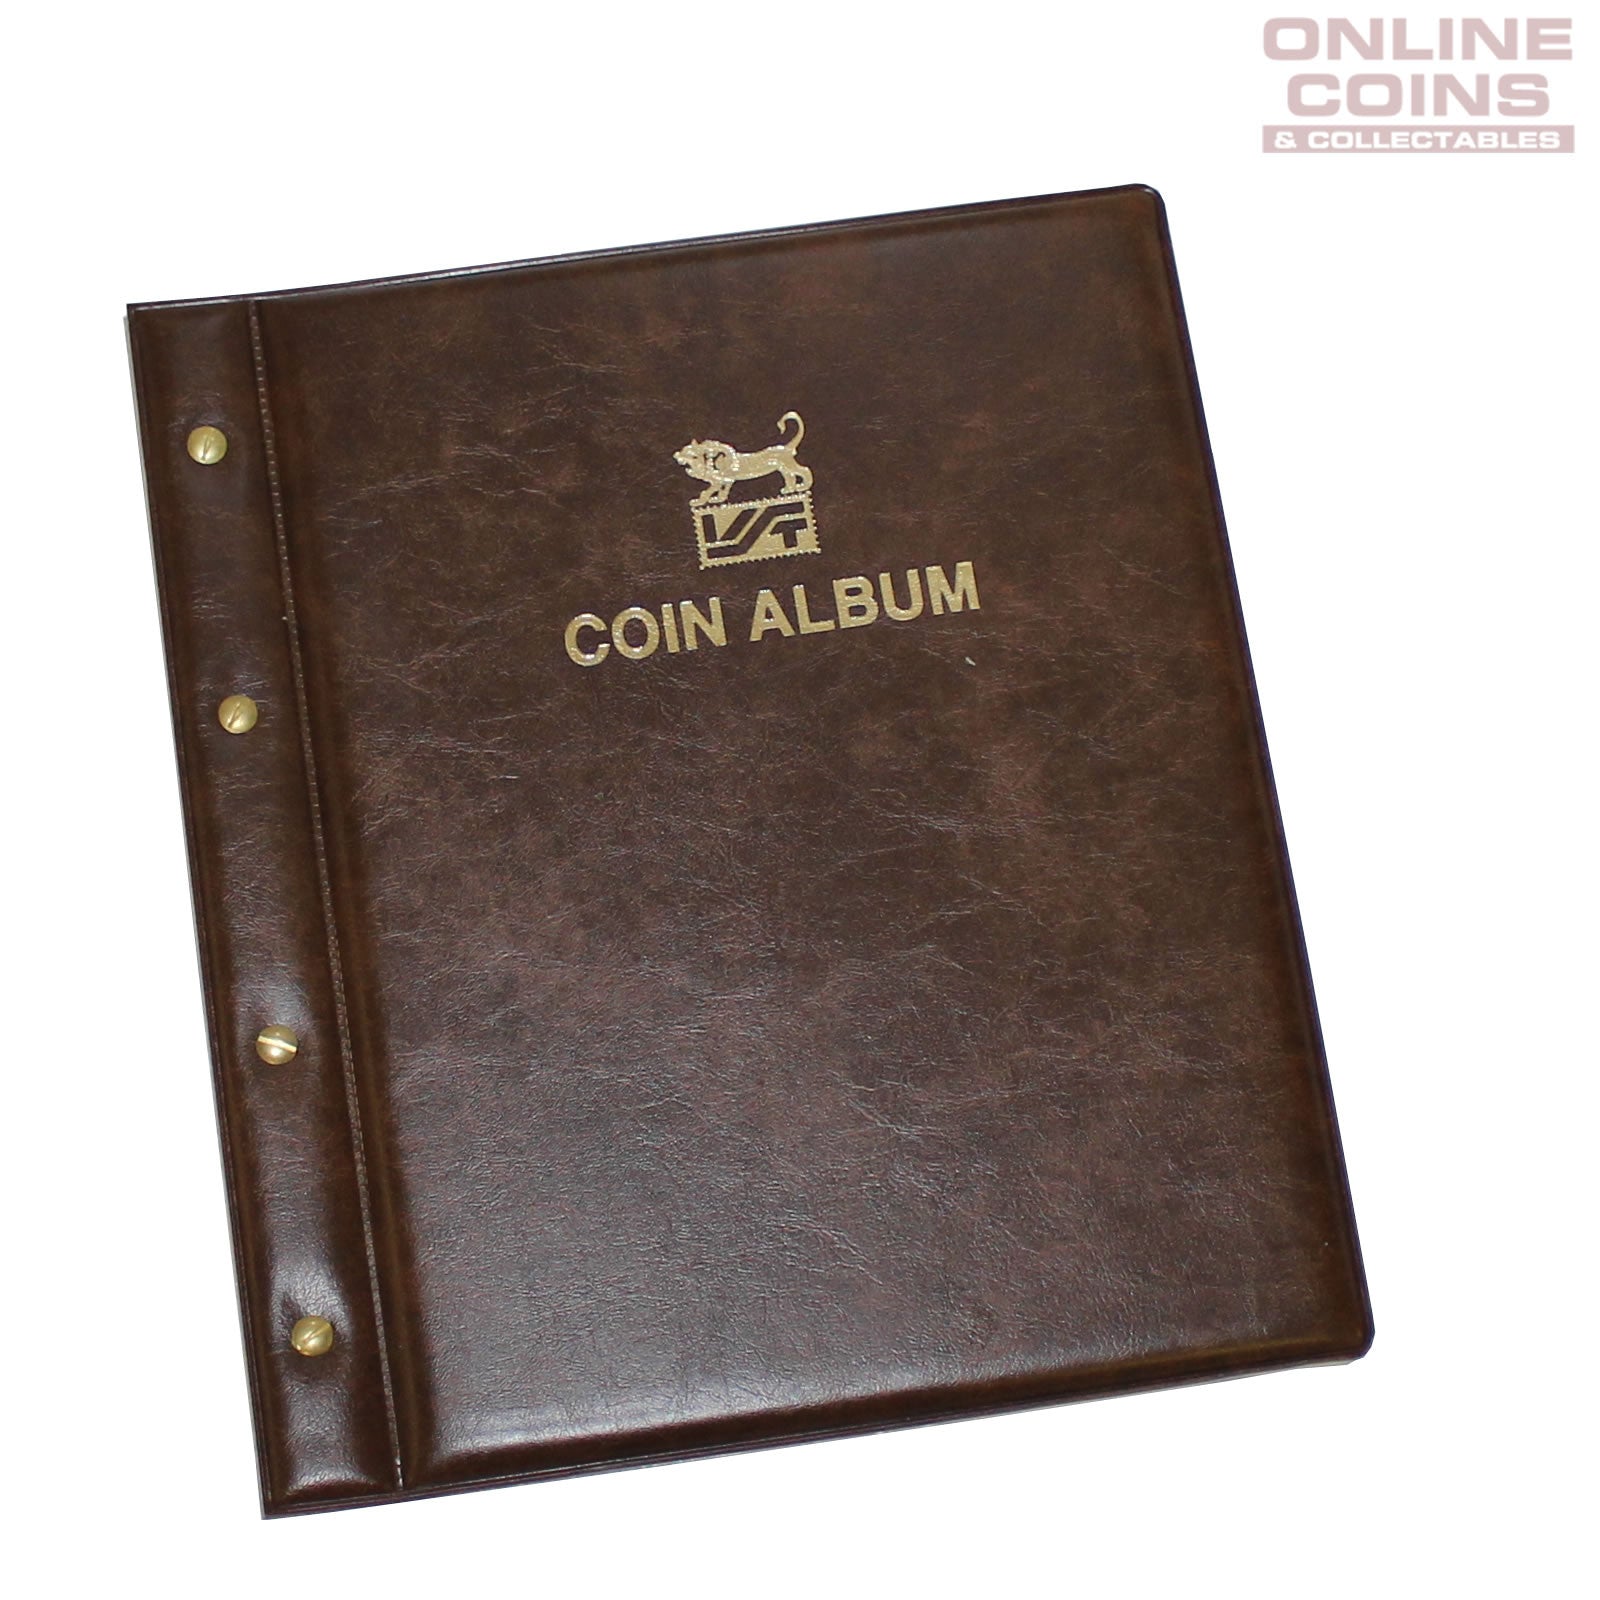 VST Coin Album Padded leatherette Cover Including 6 Coin Album Pages - BROWN